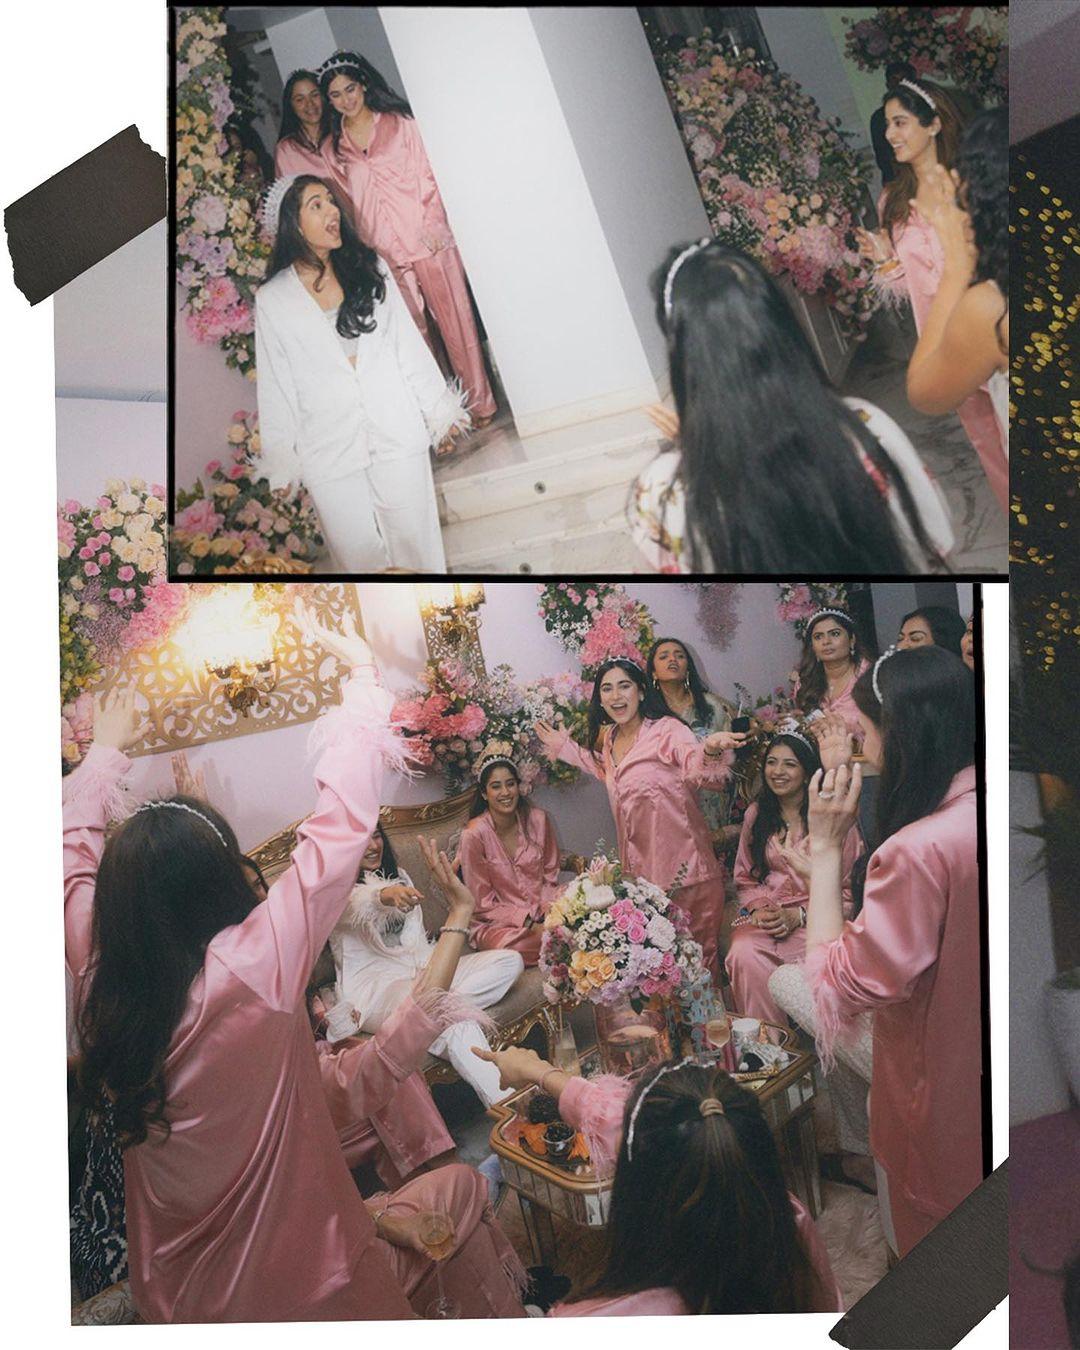 Radhika Merchant's pink slumber party was All Things Cute. The pictures from the celebration were so adorable that we all wish to have such friends who could do so much for us